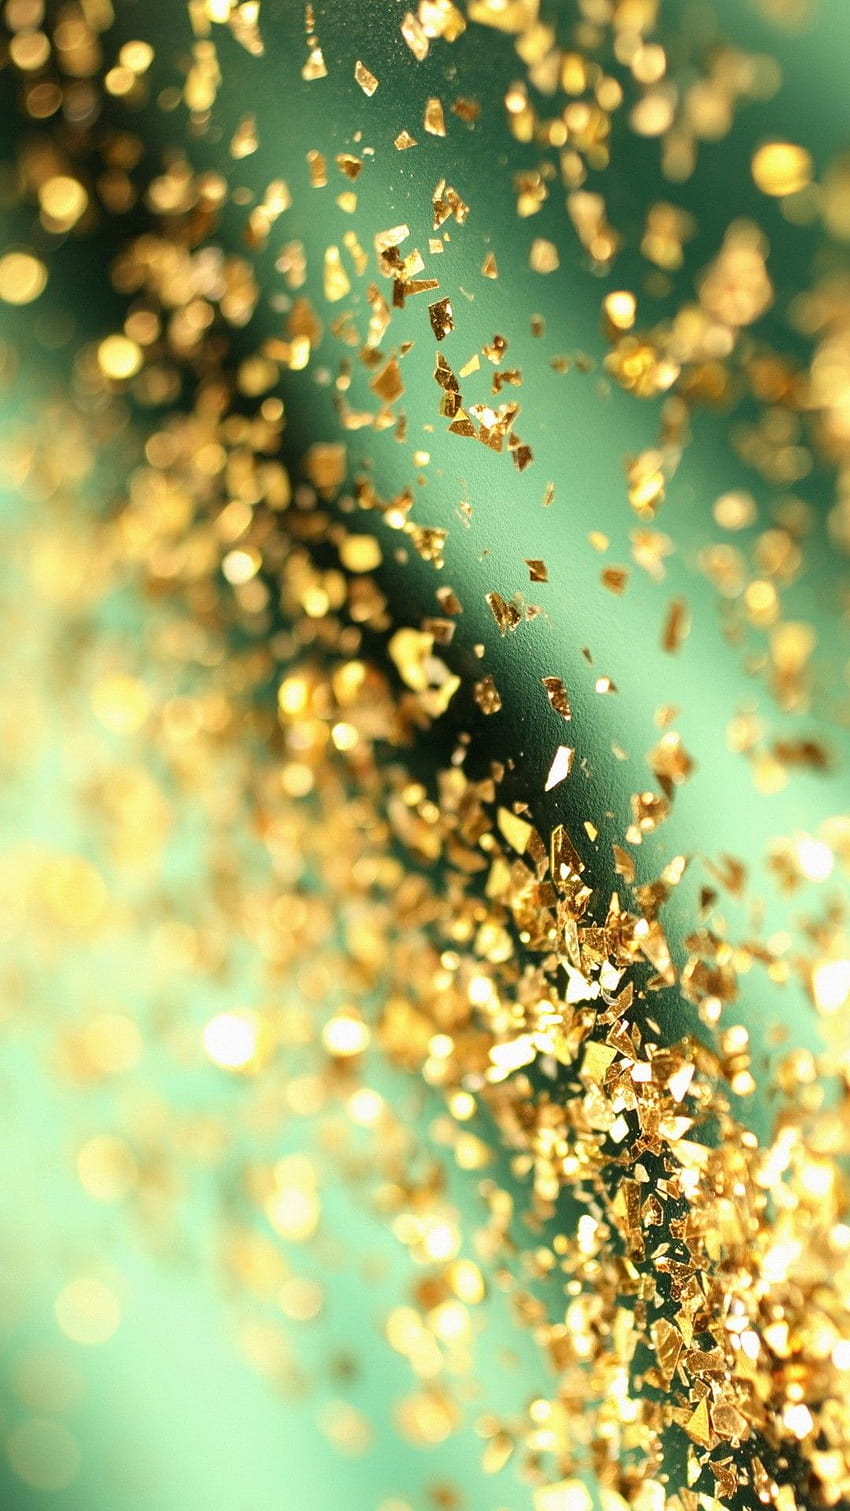 glitter iphone wallpapers